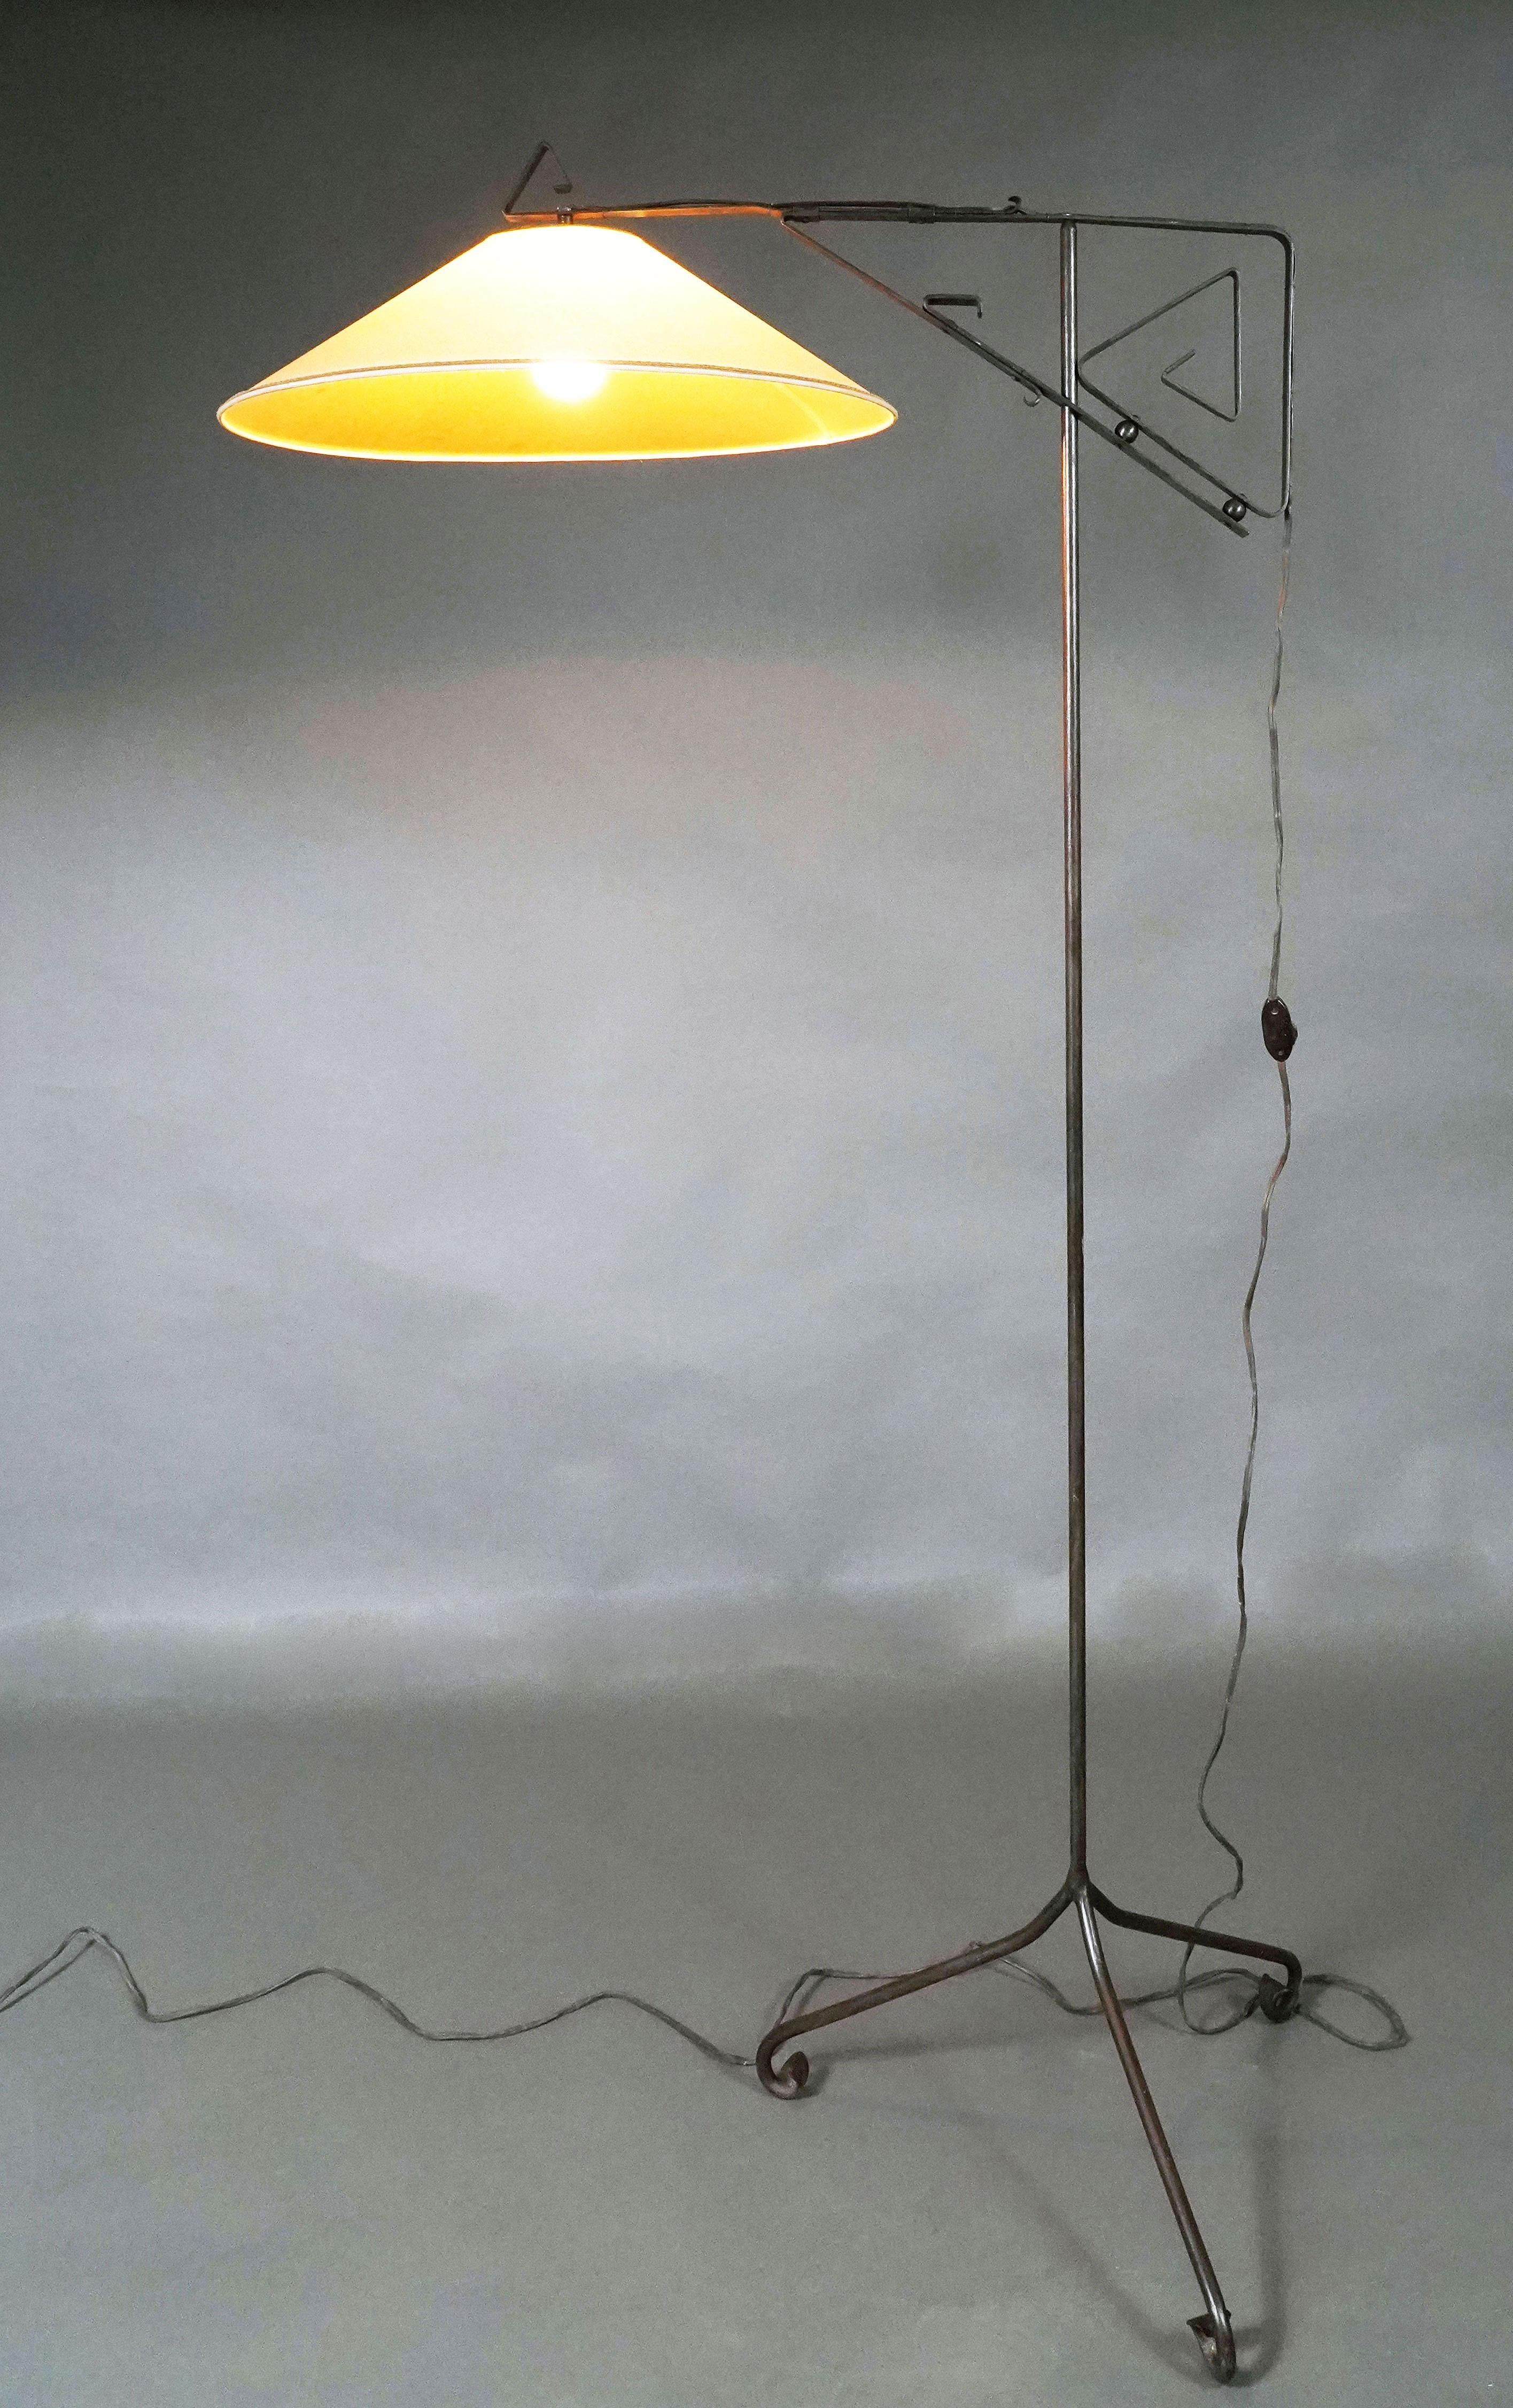 Width with Lampshade : 86,4 cm 
Diameter of the Lampshade : 54,5 cm
Dimensions of the tripod part : 54,5 cm for each side

Floor lamp in black patinated metal, the arm perpendicular to the shaft ending in a coiled motif.

European Artistic Context